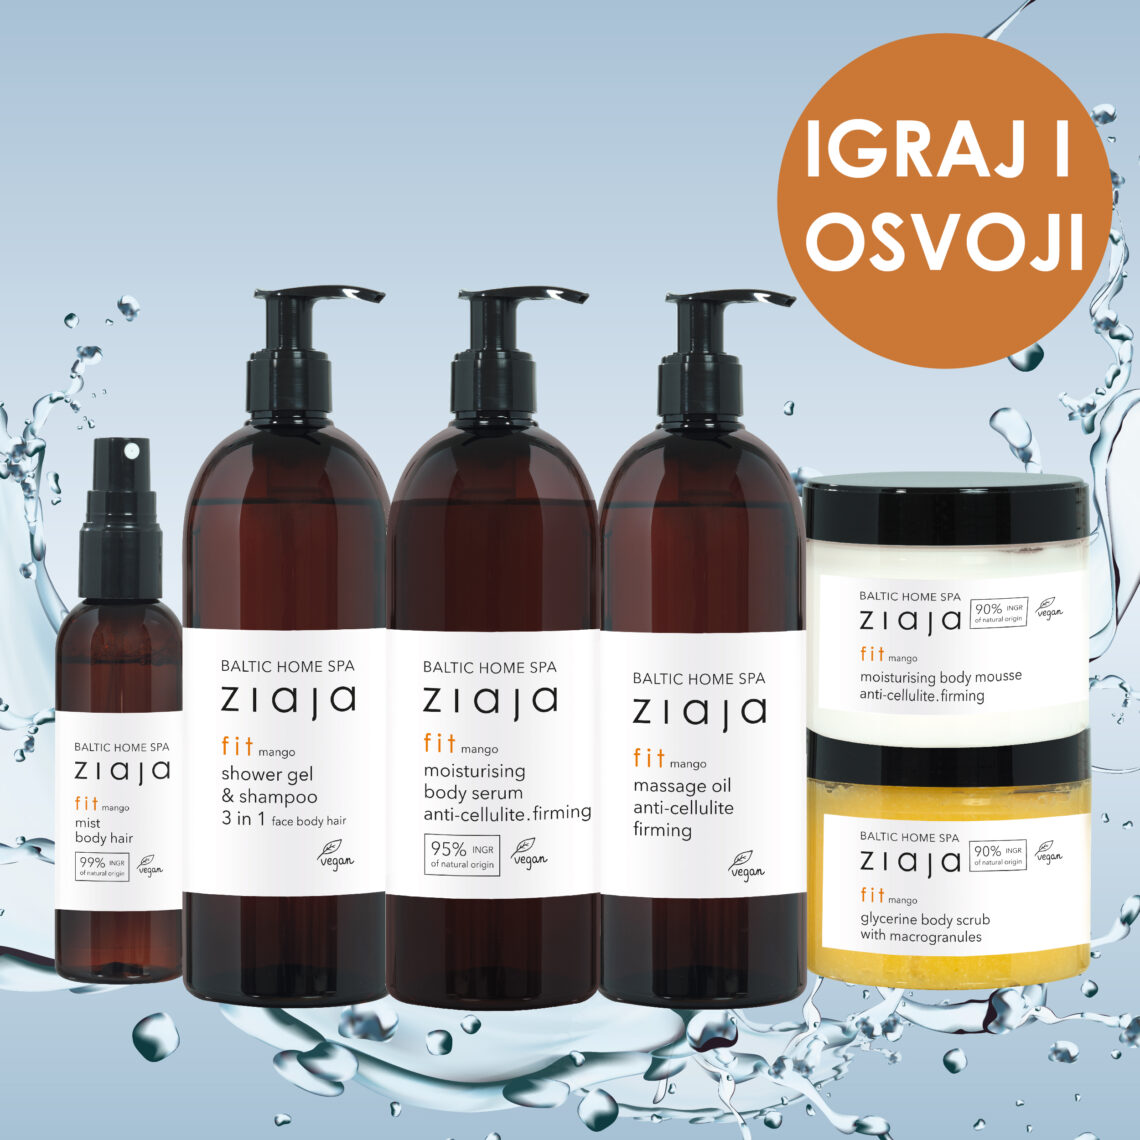 Ziaja Baltic home spa fit giveaway